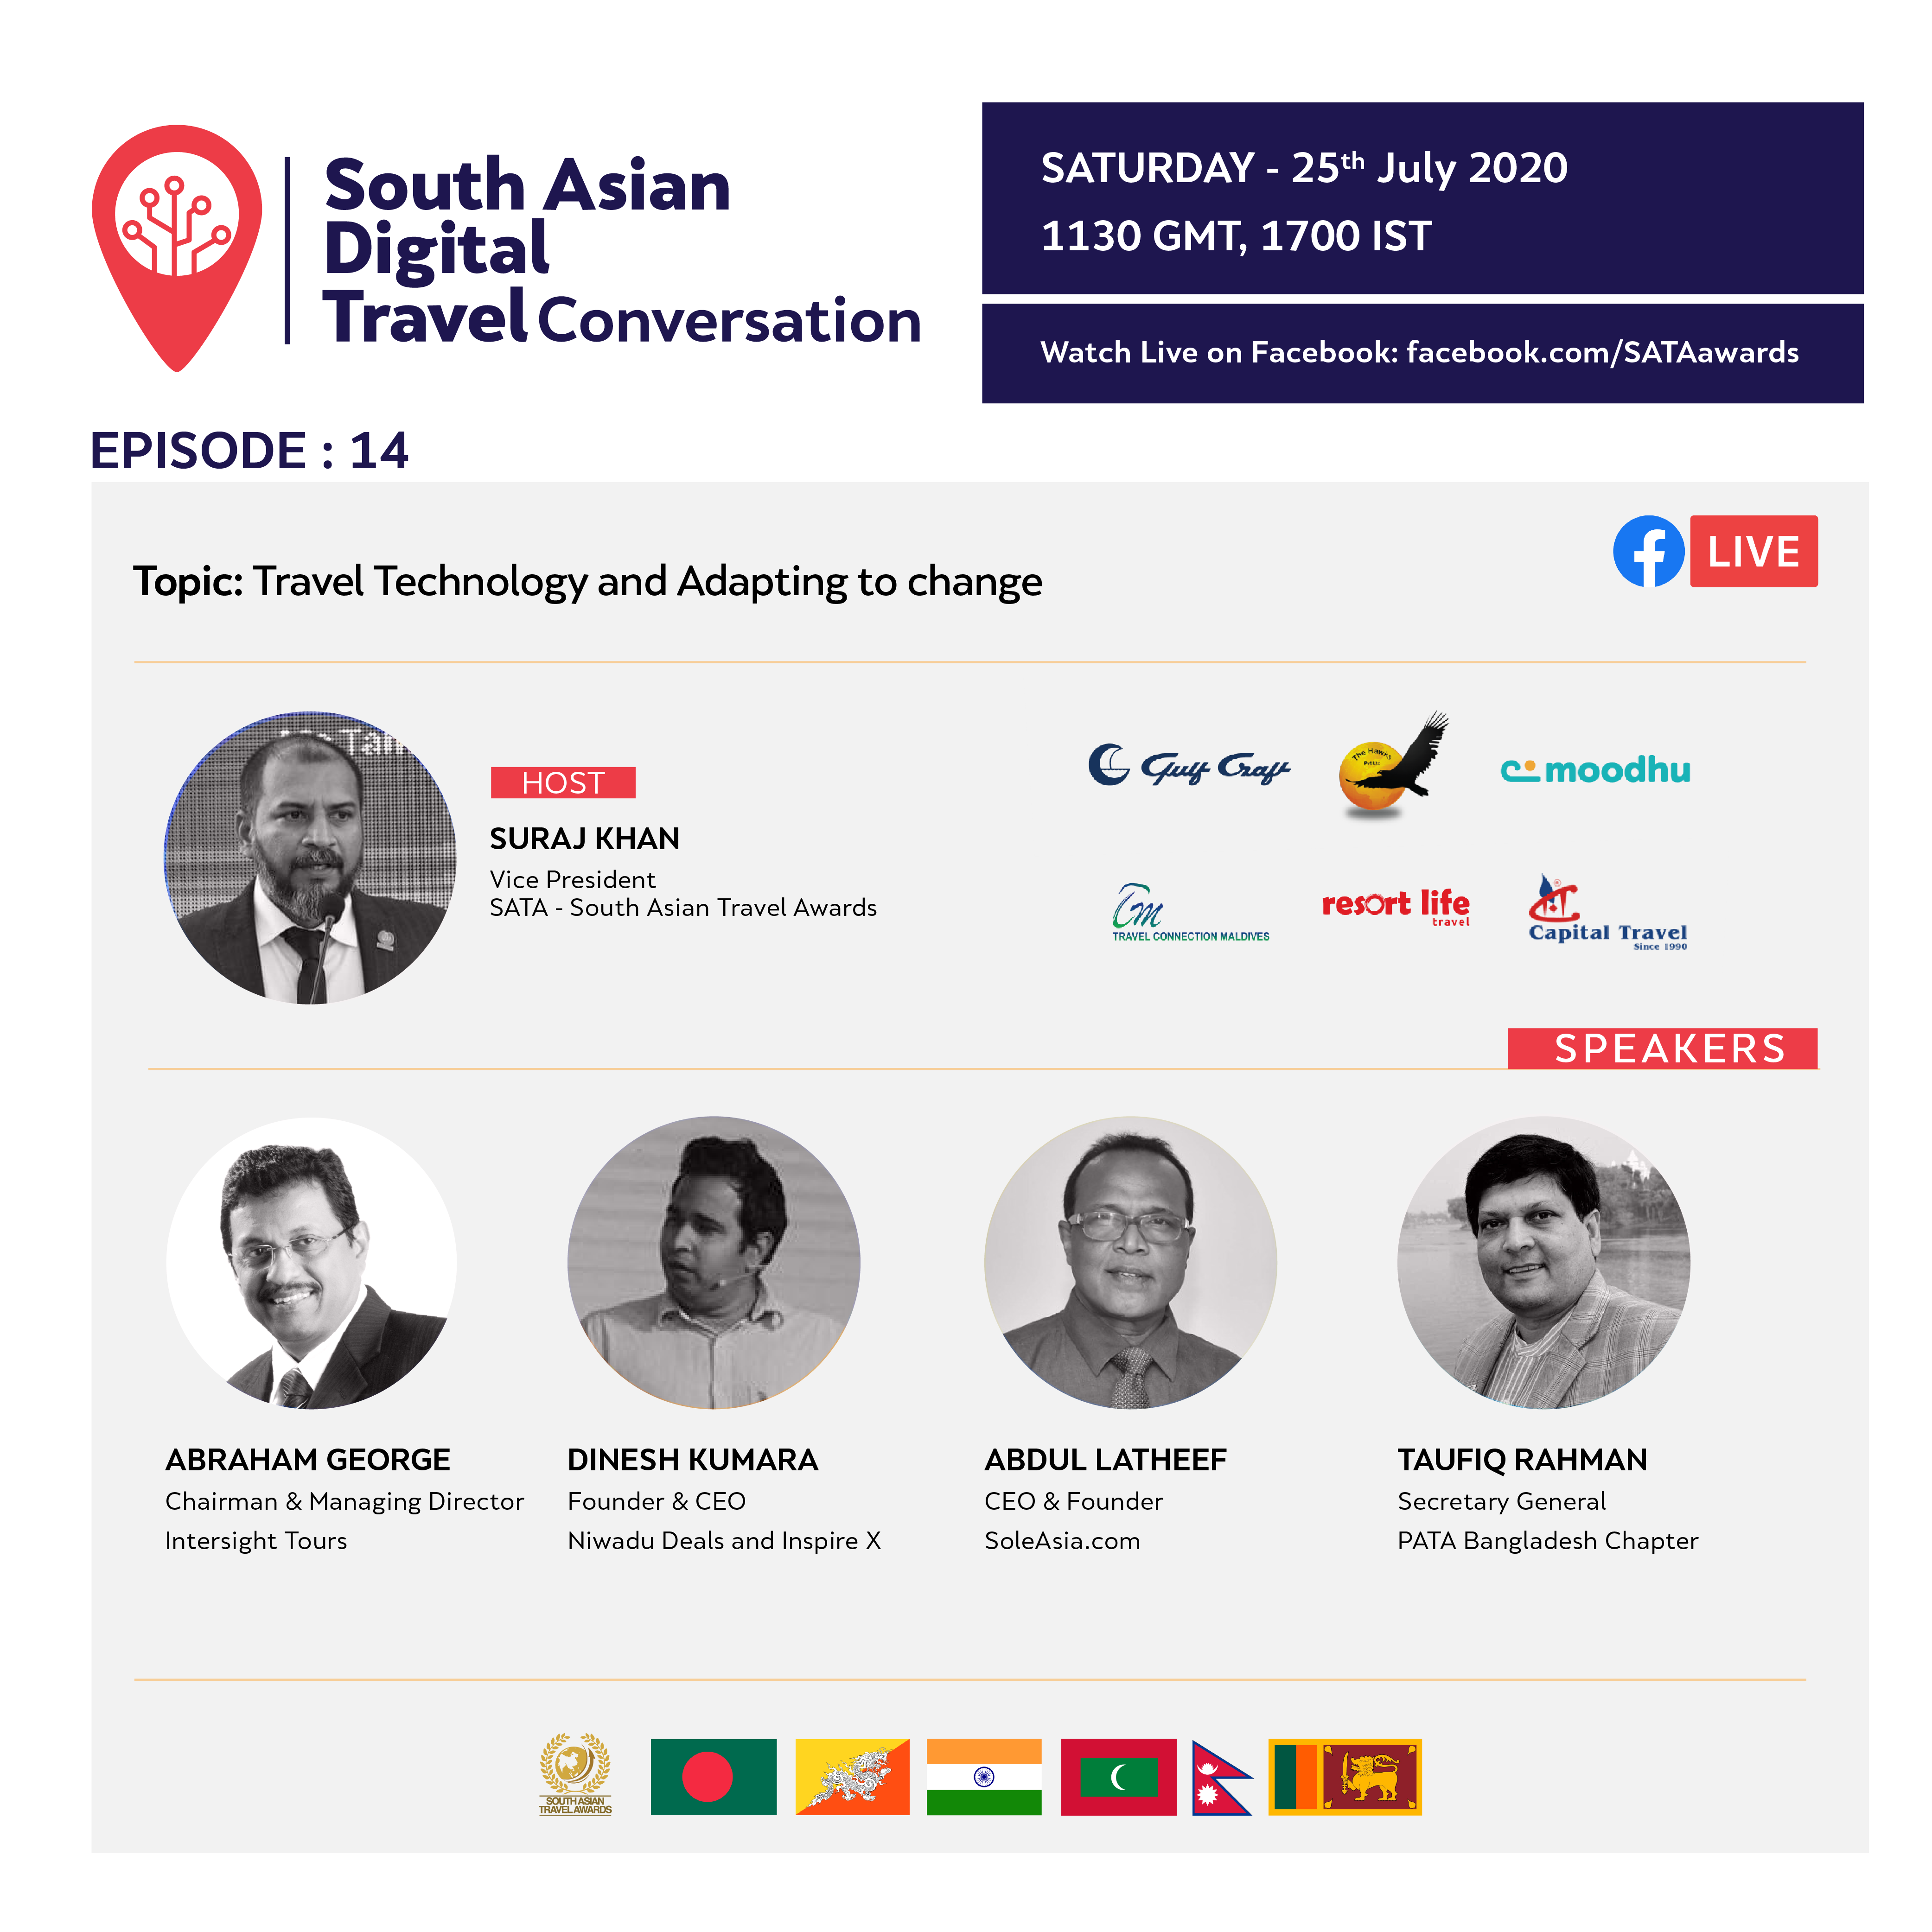 Experts Talks on Travel Technology & Adapting to change